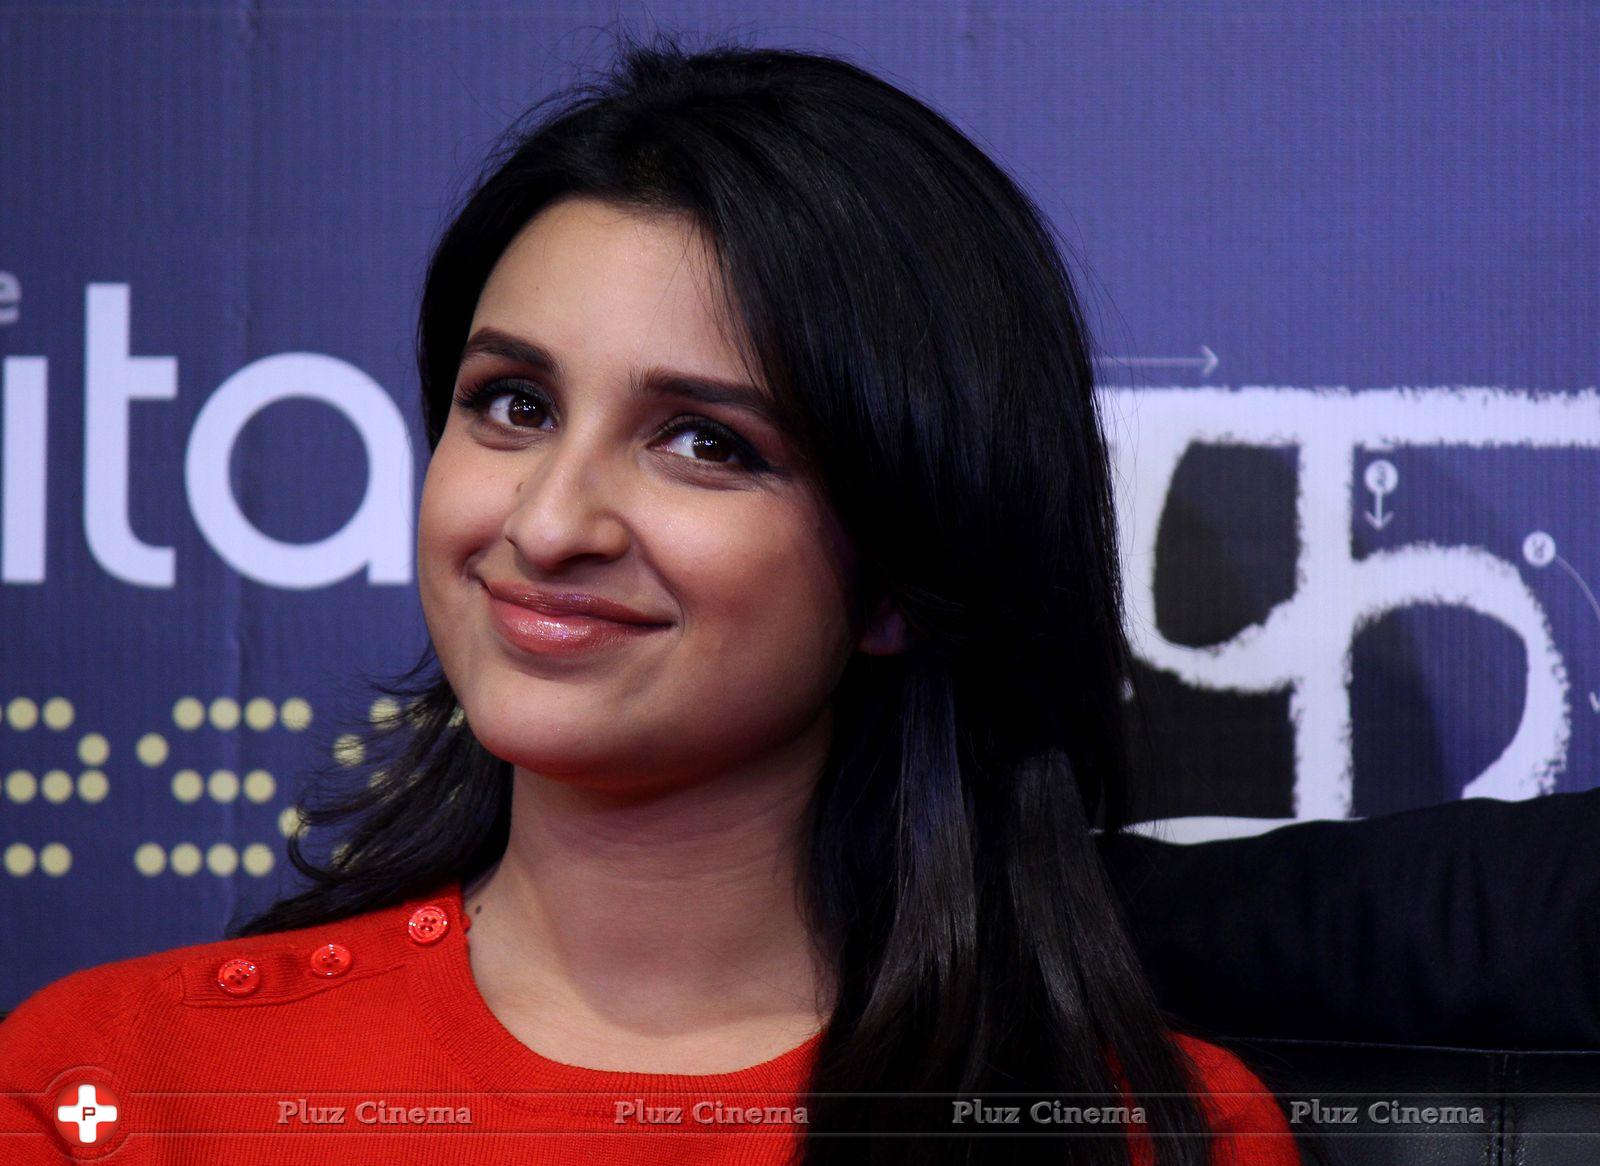 Parineeti Chopra - Launch of mobile app of film Hasee Toh Phasee Stills | Picture 704971